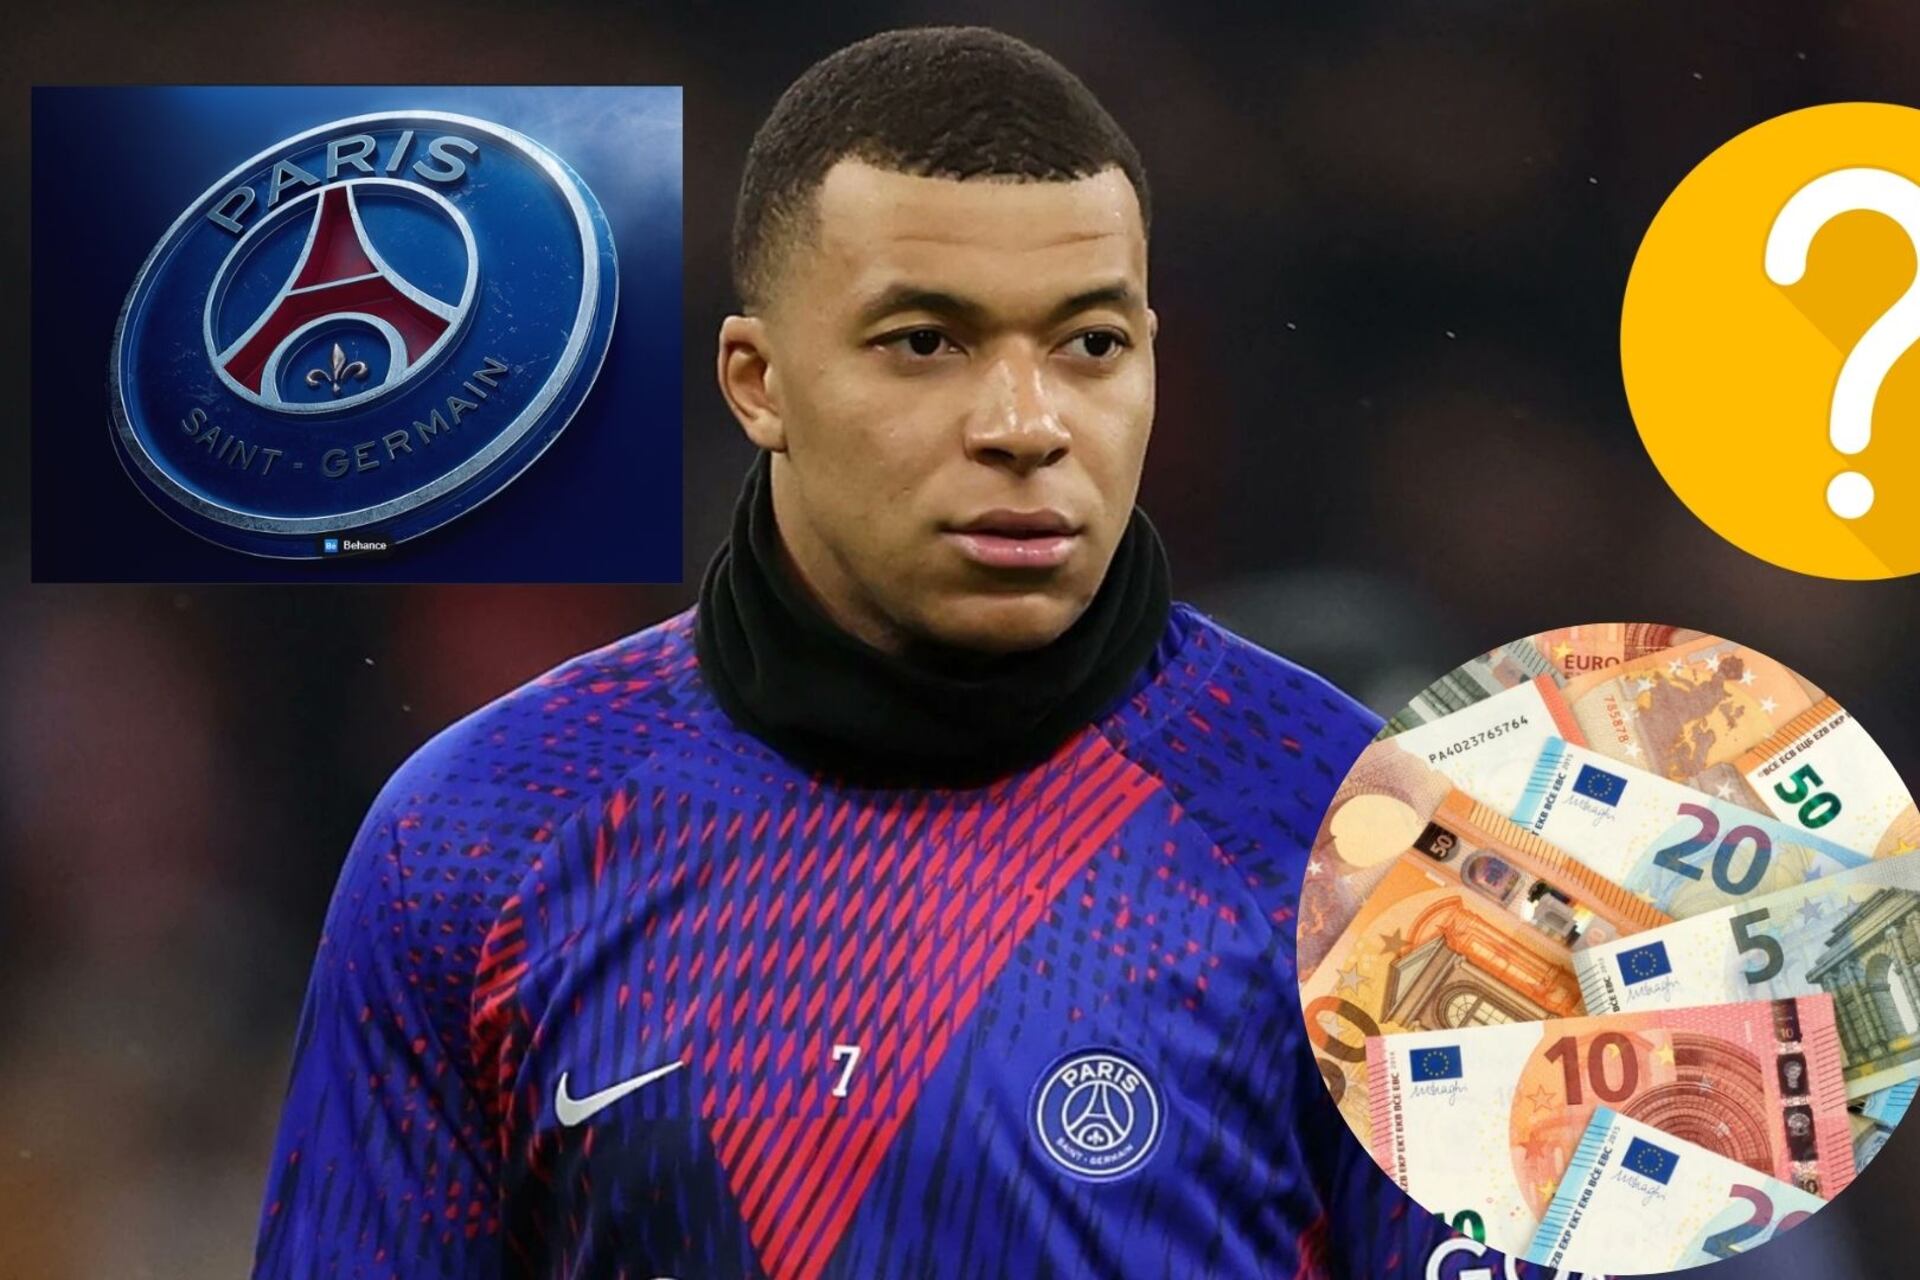 He has scored 42 goals, is worth 91 million and would replace Mbappé at PSG